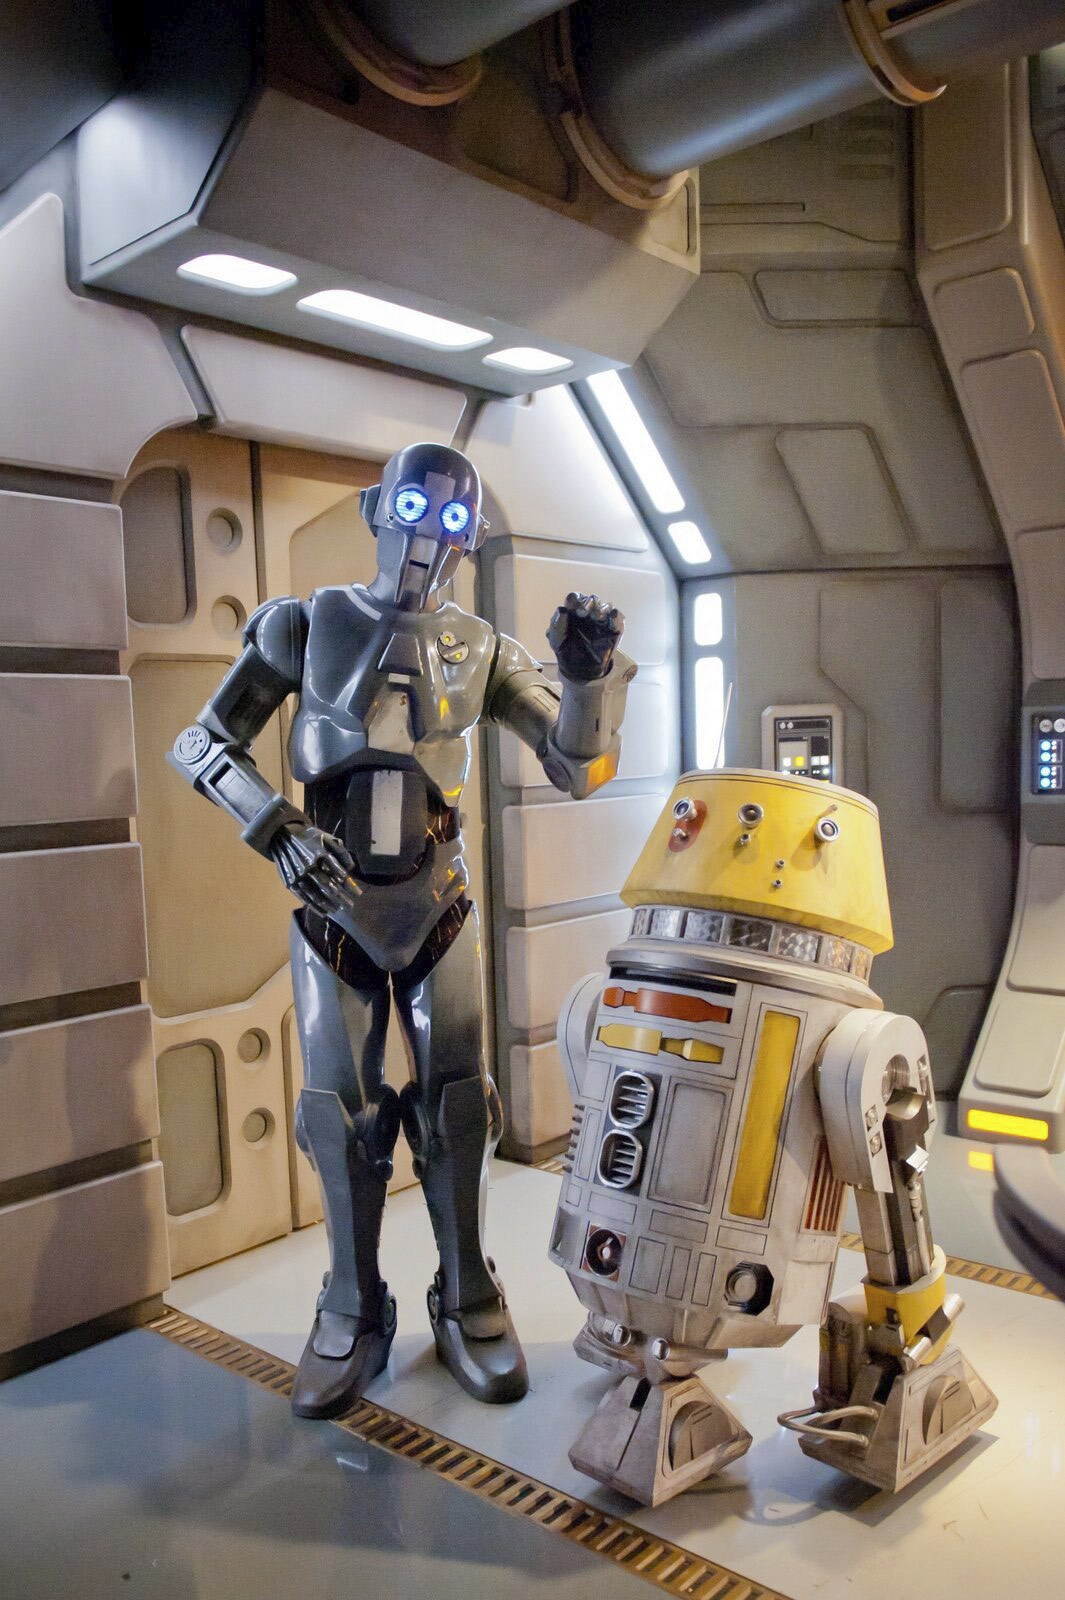 The hilarious new droid duo of AD-3 (voiced by Mary Holland) and LX-R5.